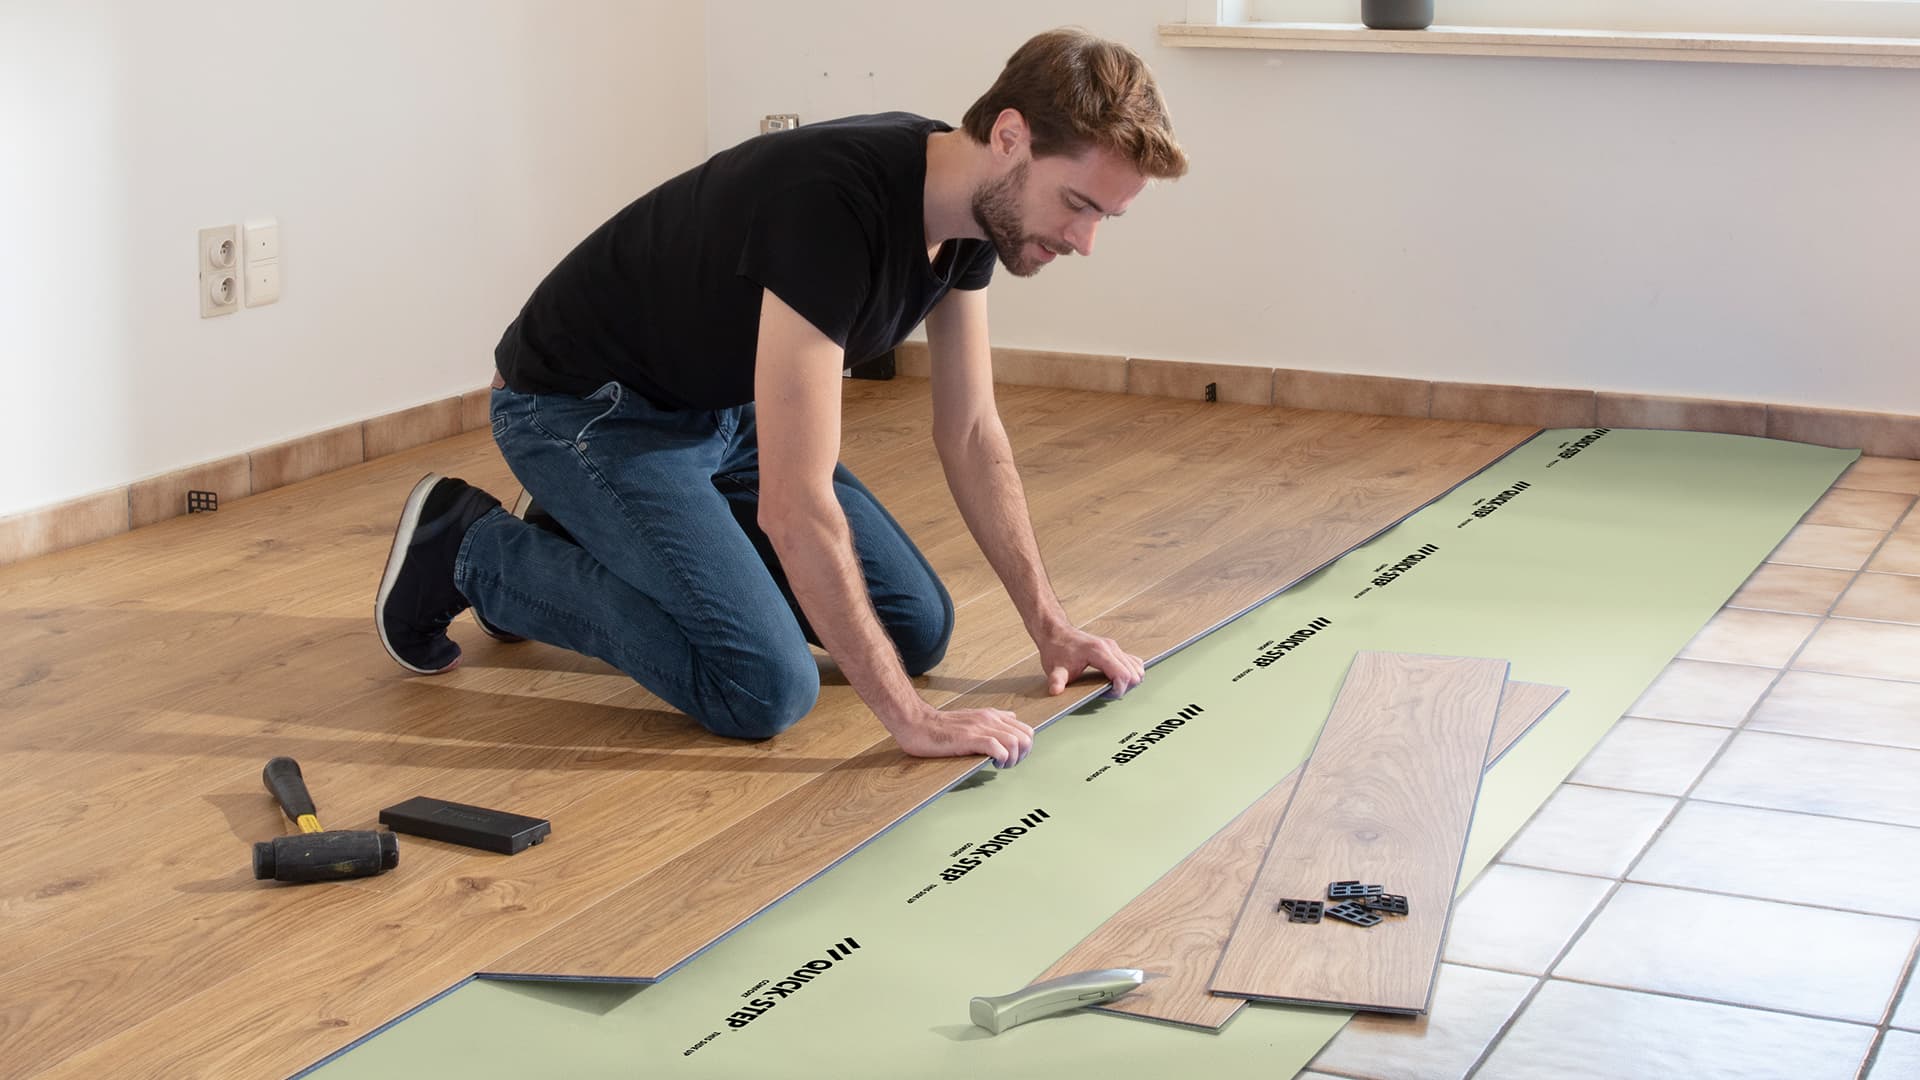 Vinyl Flooring Installation Guide: A Step-by-Step Guide